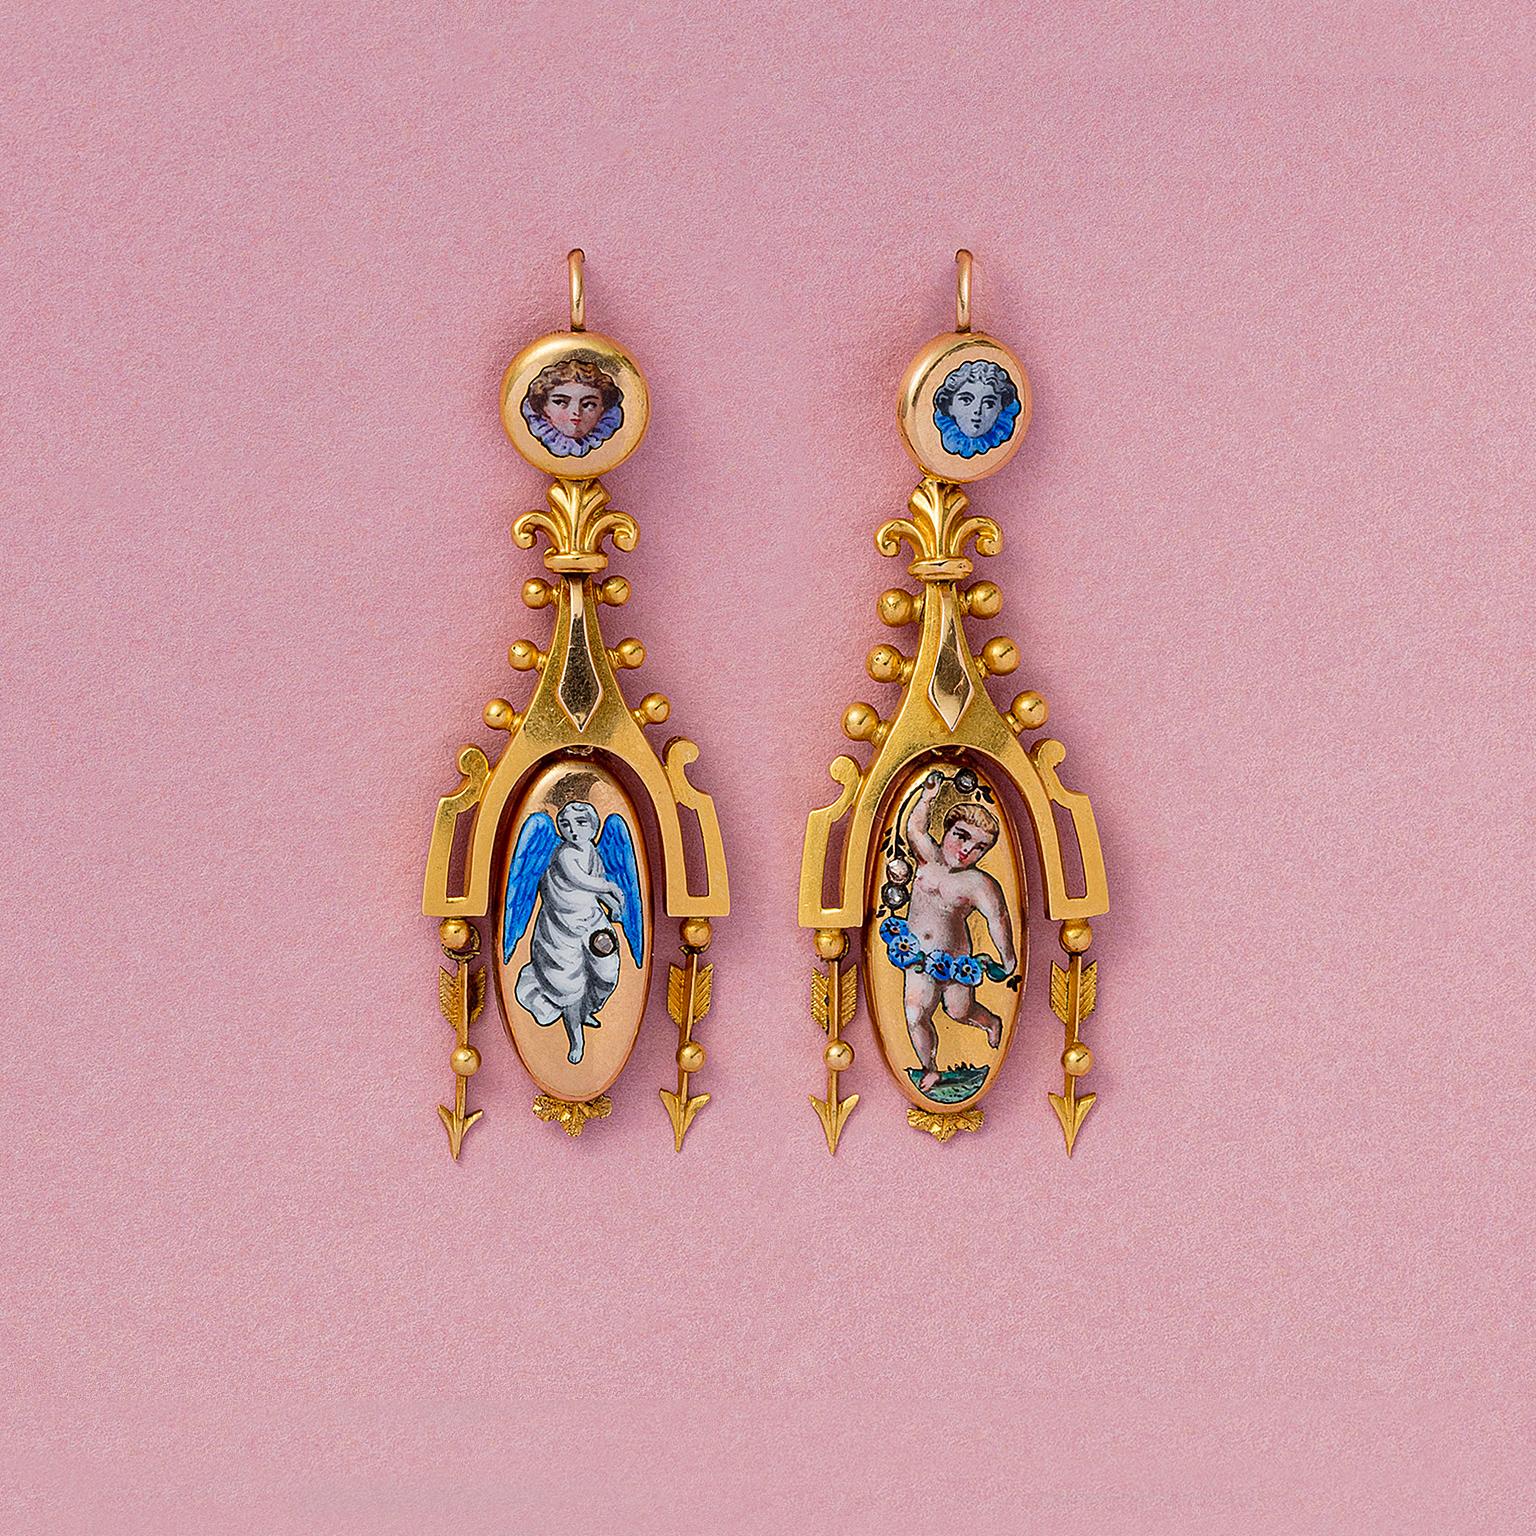 A pair of gold dangling earrings, one with an enameled dancing putto and one with an angel, set with small old-cut diamonds and decorated with little dots and arrows and fleur de lys, with locket compartments at the back. Marked: CG (possibly